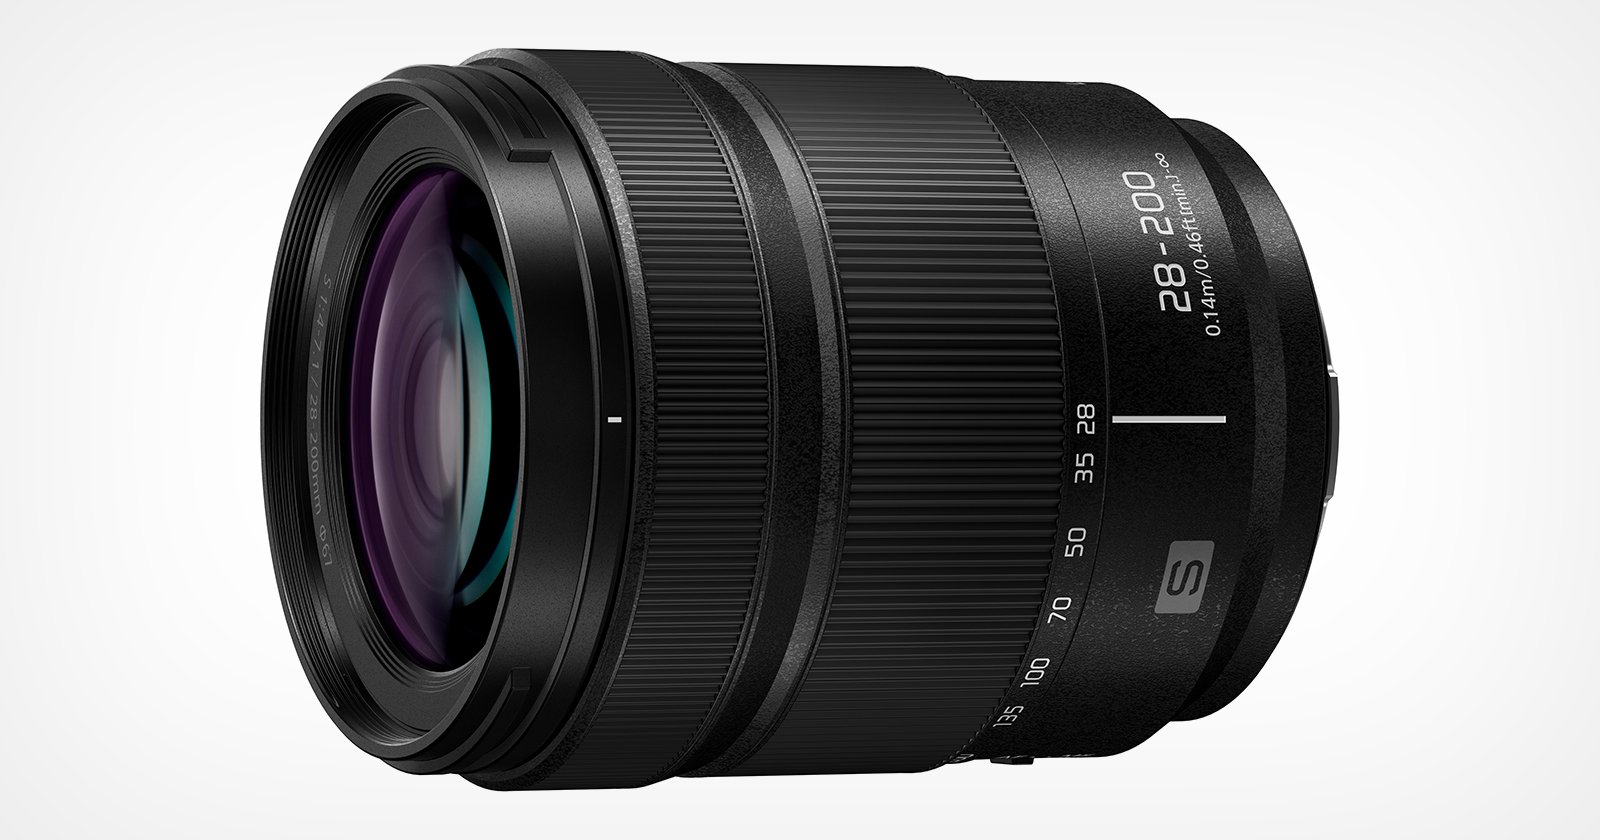 Panasonic Lumix S 28-200mm f/4-7.1 Is L-Mounts First All-in-One Zoom